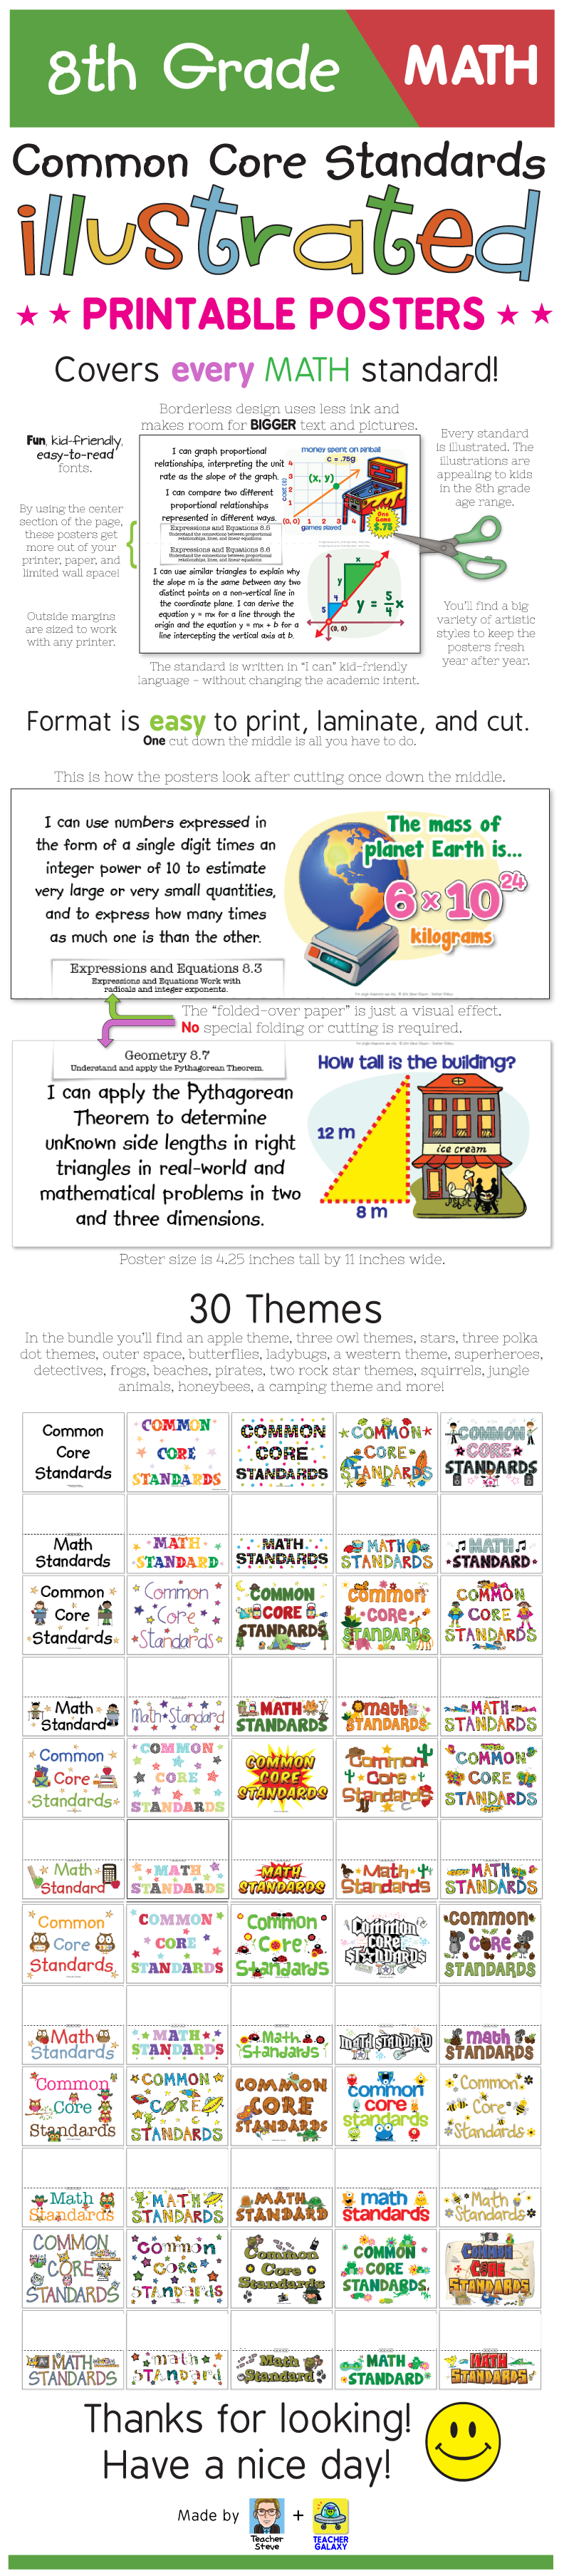 These posters for the 8th grade math Common Core Standards bring the standard to life and make it easier to understand with